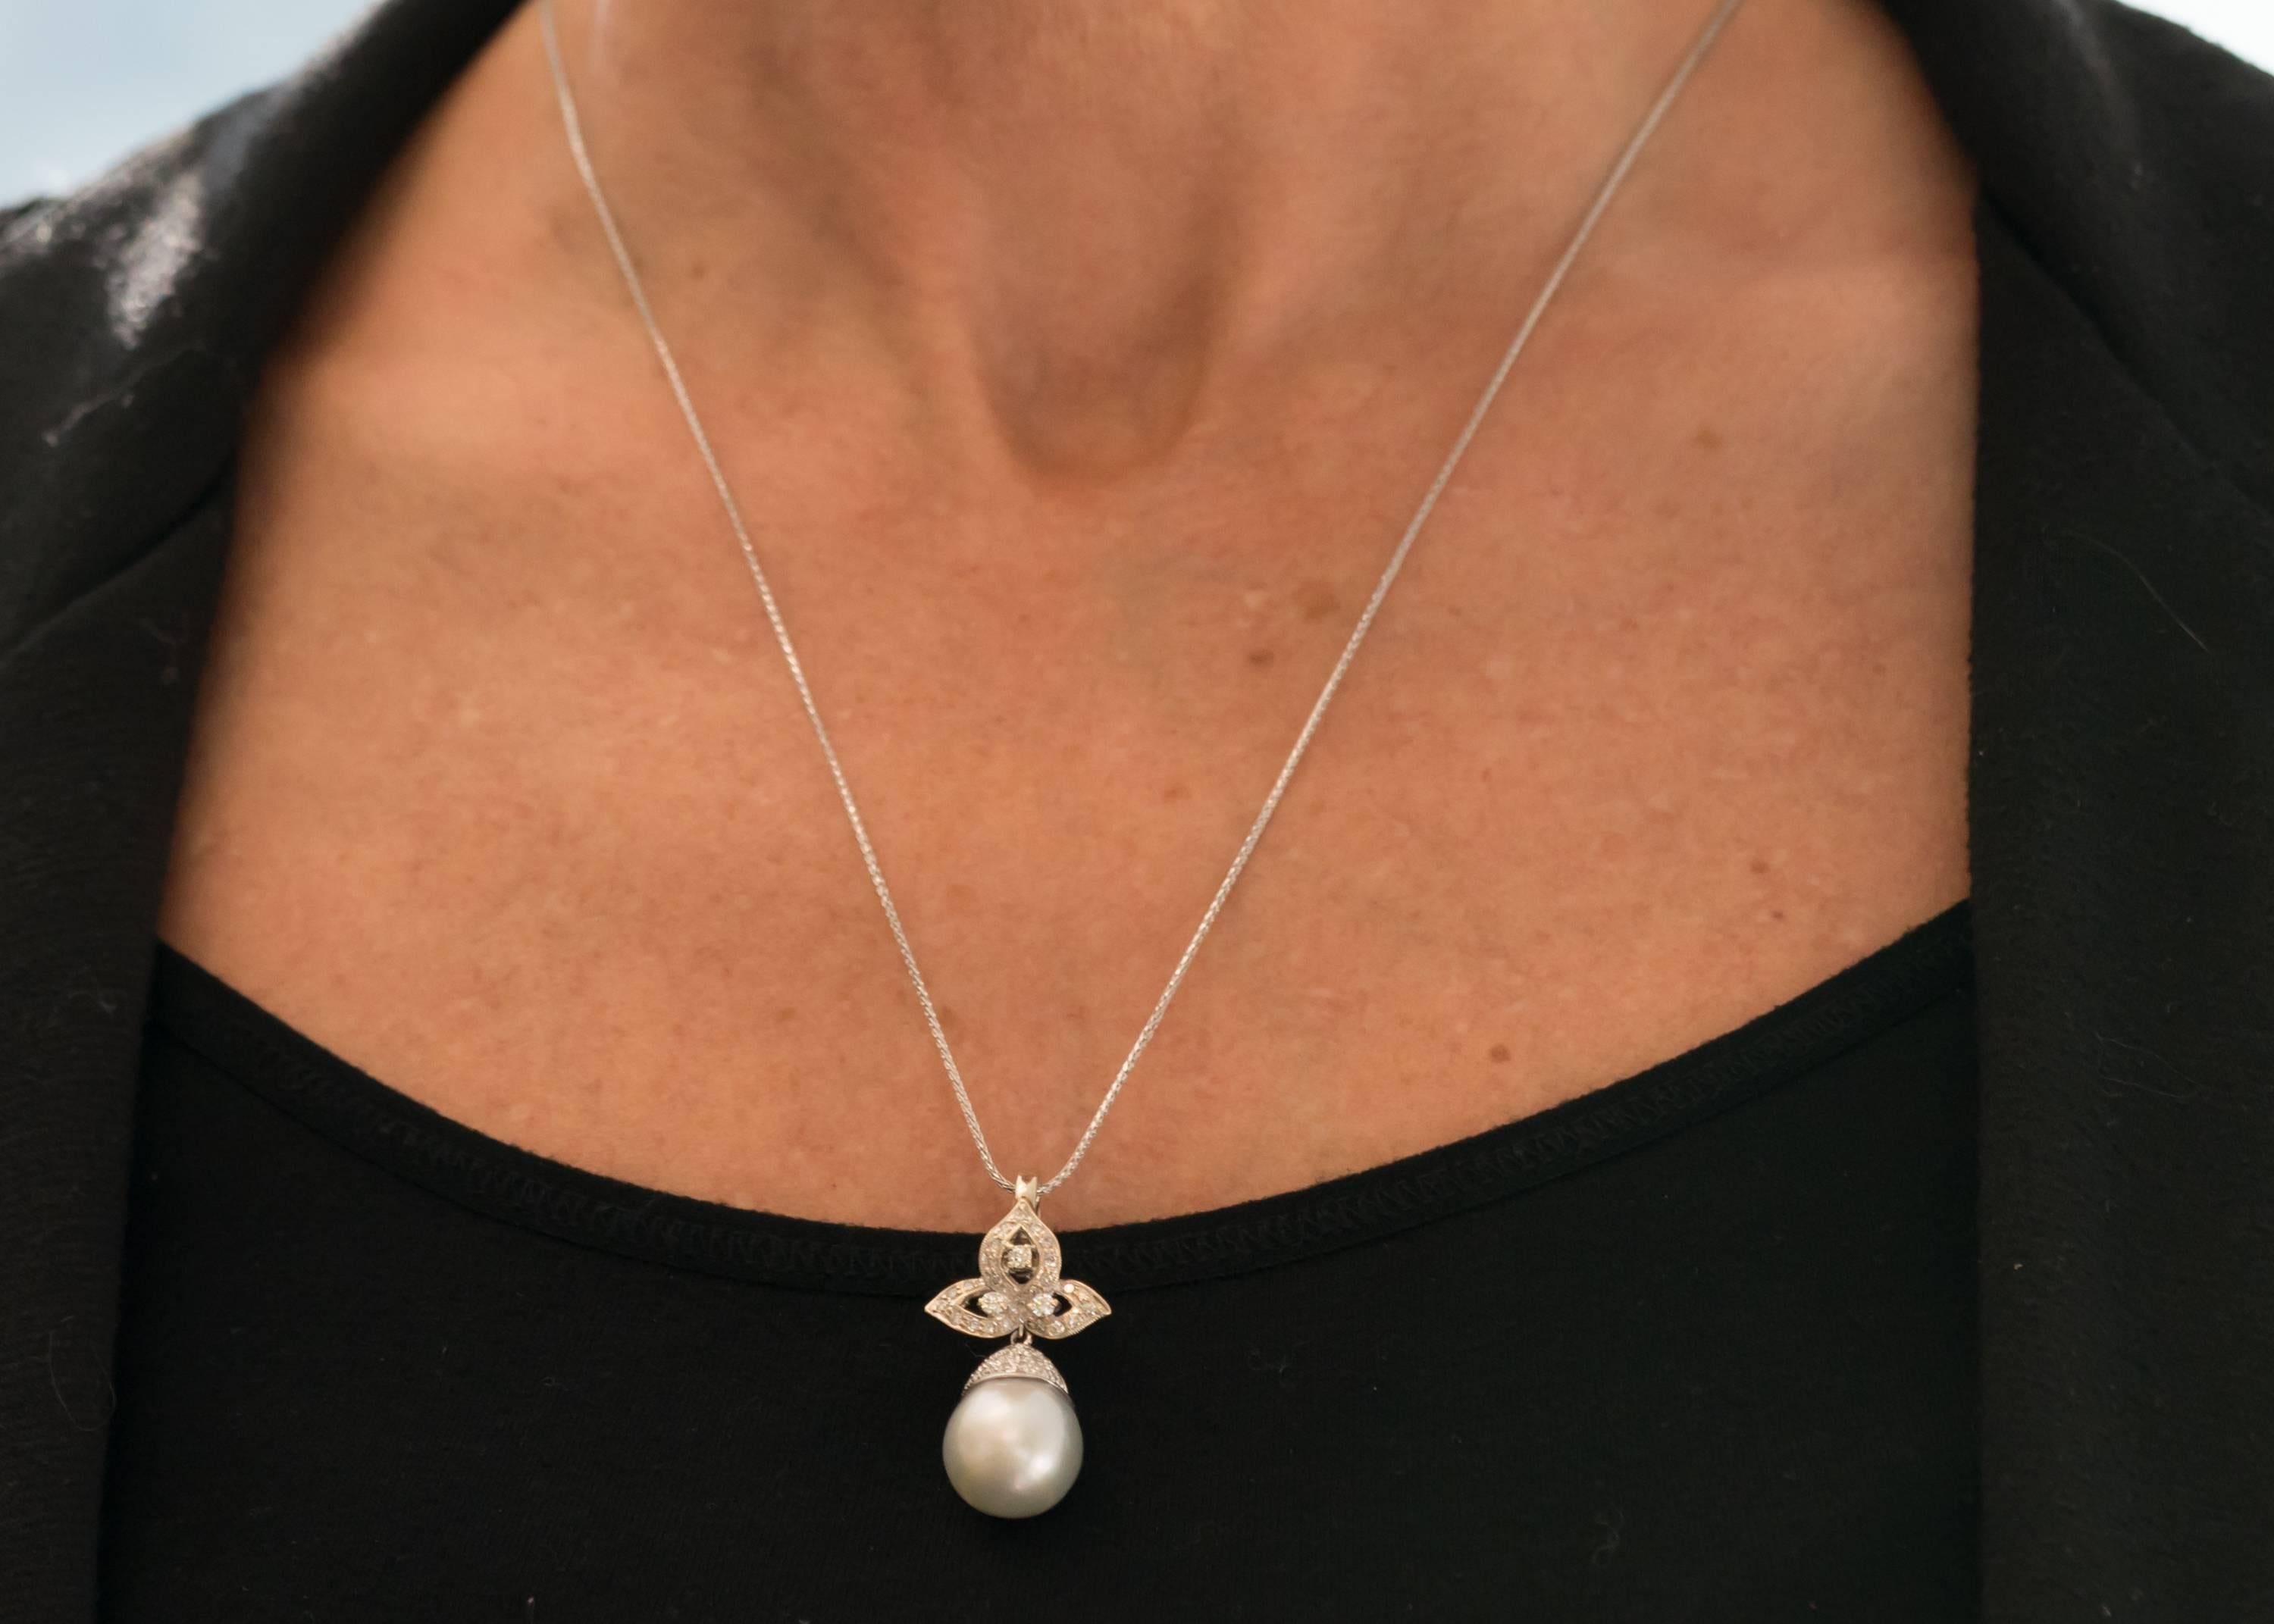 Women's 1980s .50 Carat Diamond and Pearl Necklace Enhancer